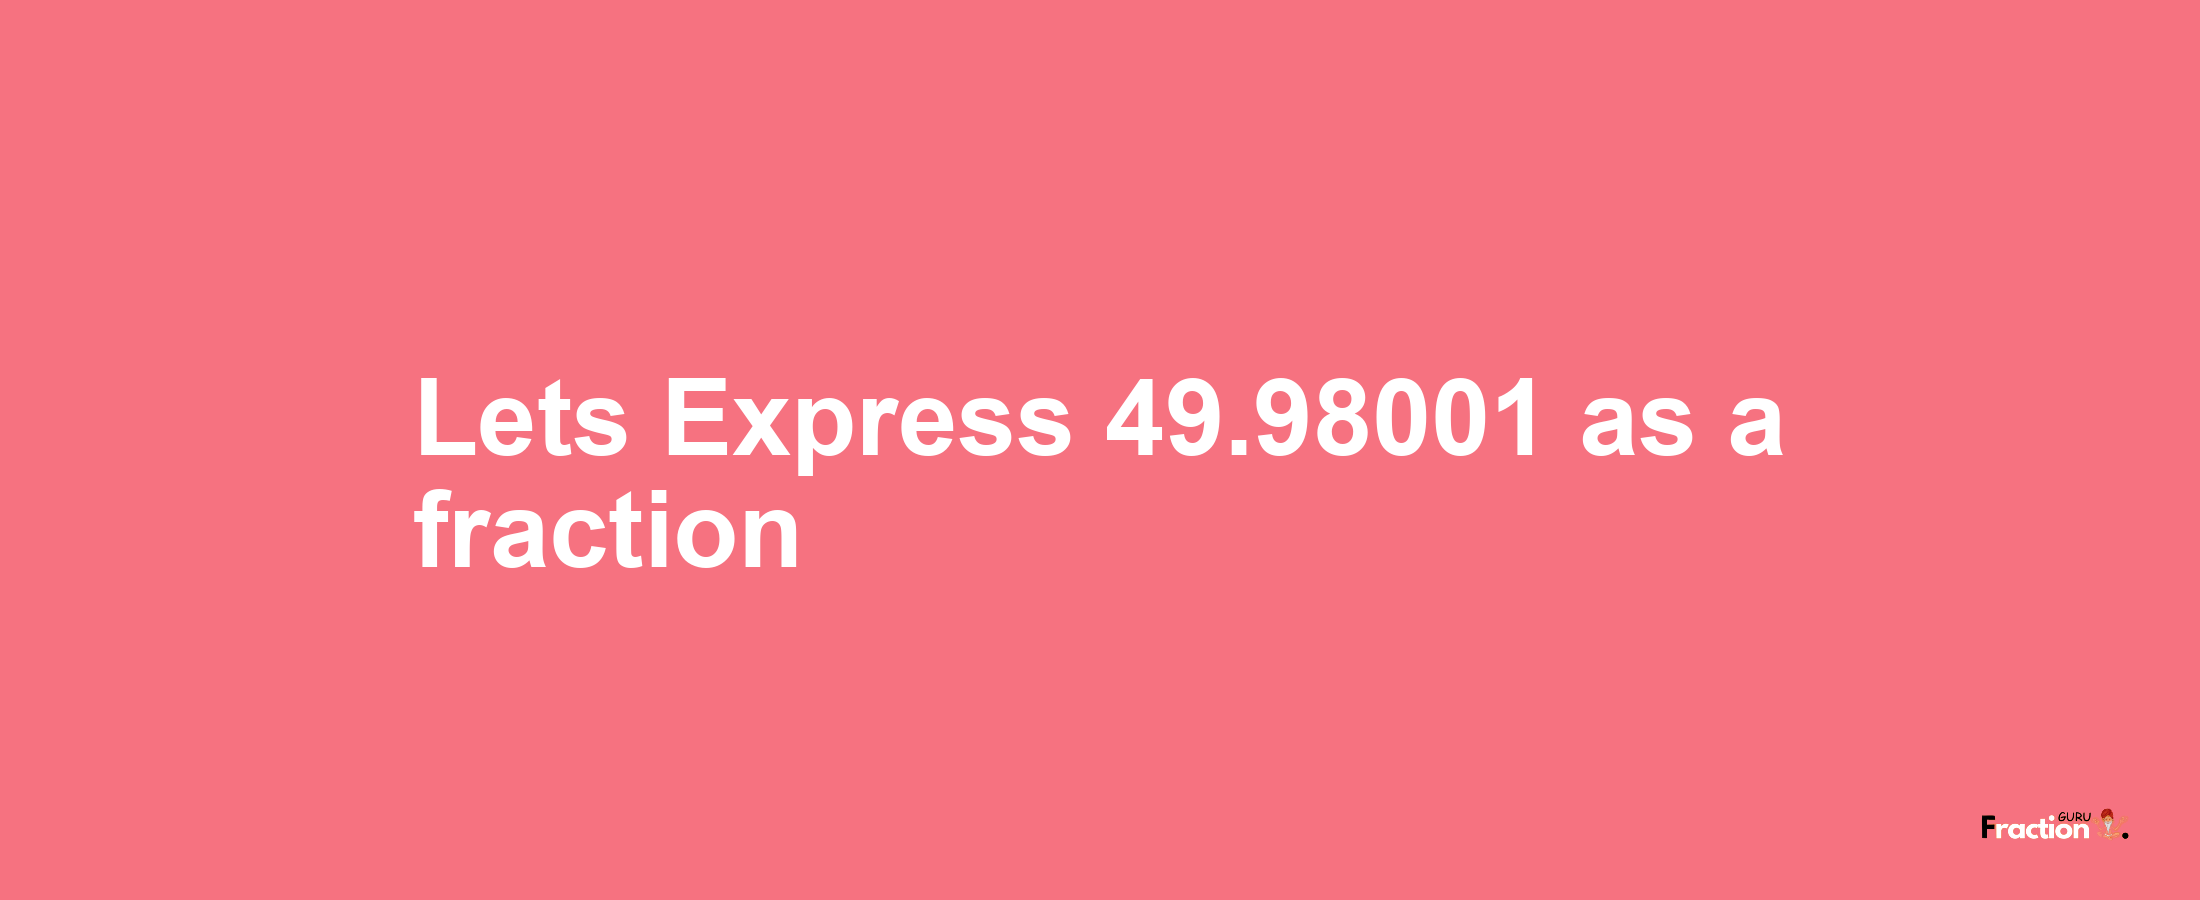 Lets Express 49.98001 as afraction